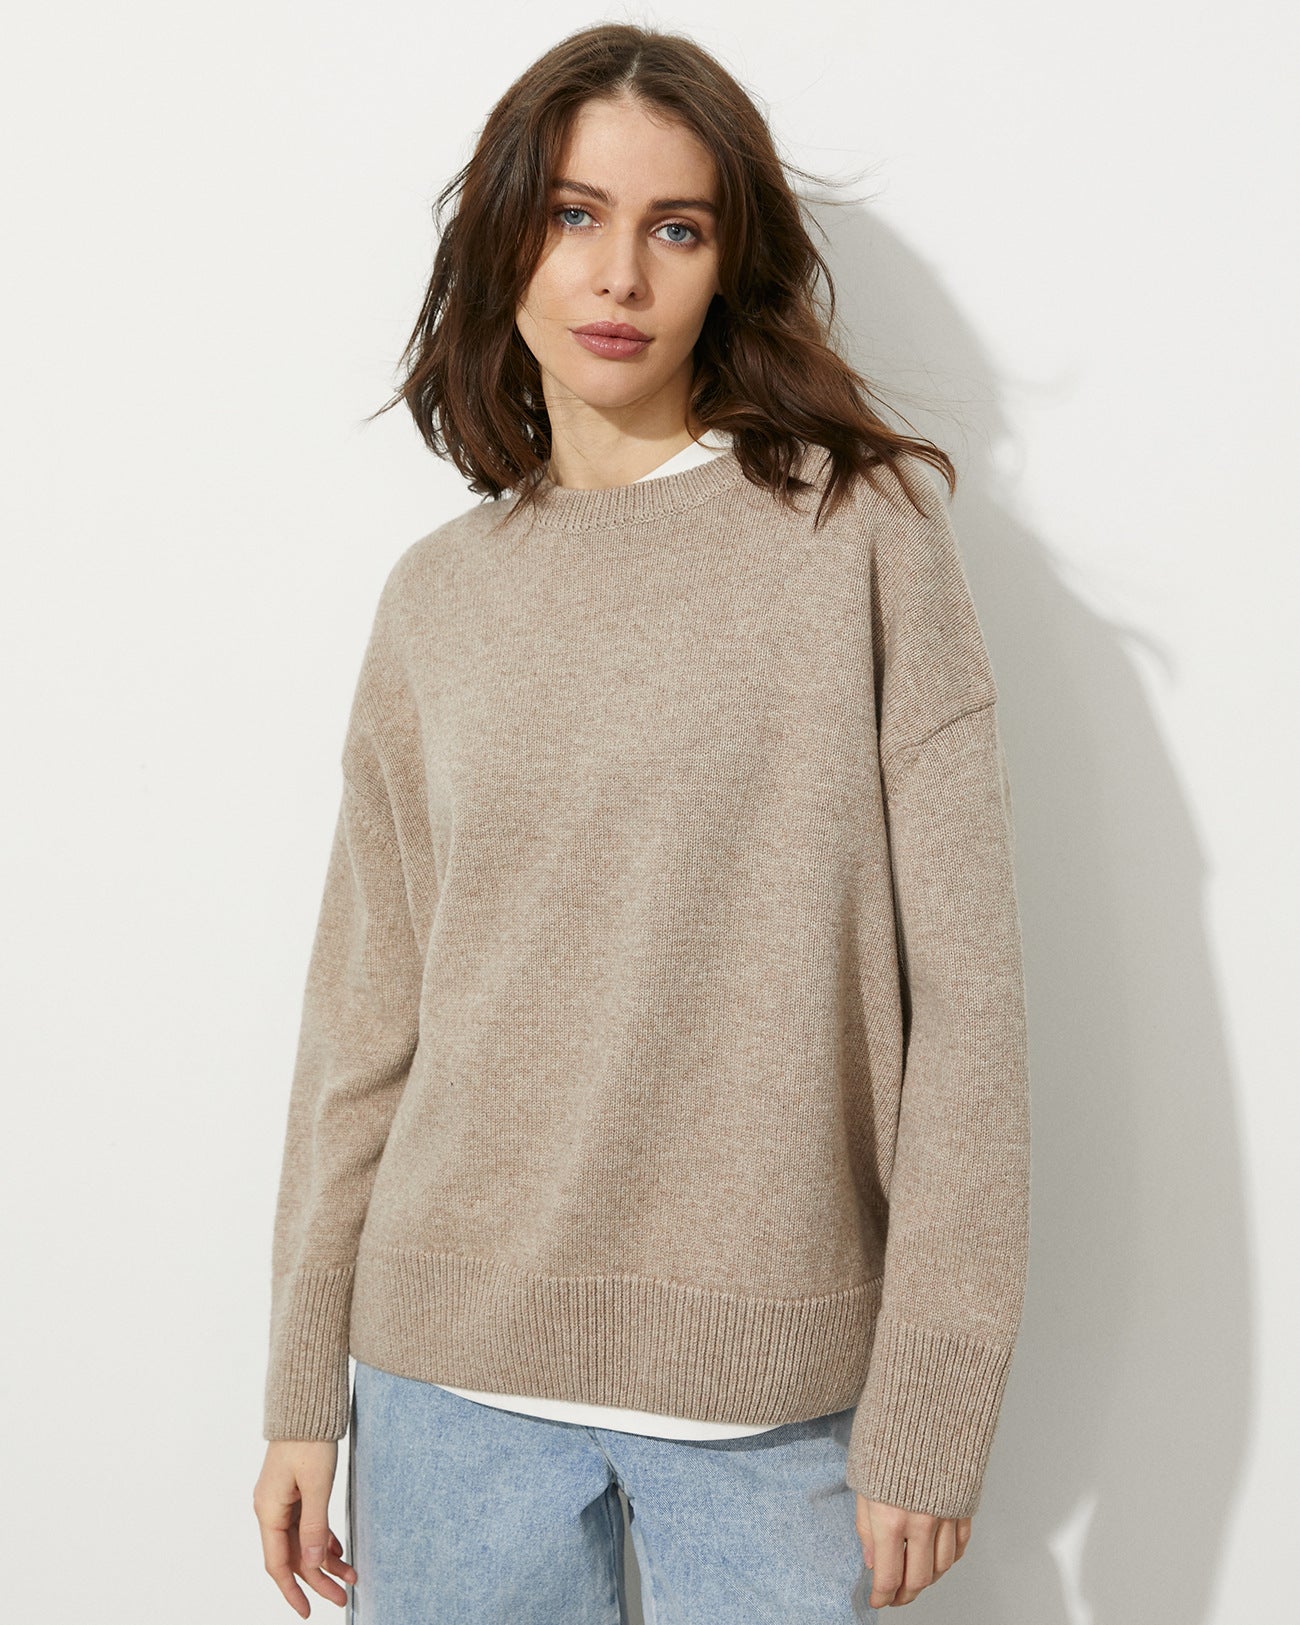 Women's Russian Round Neck Pullover Loose For Sweaters